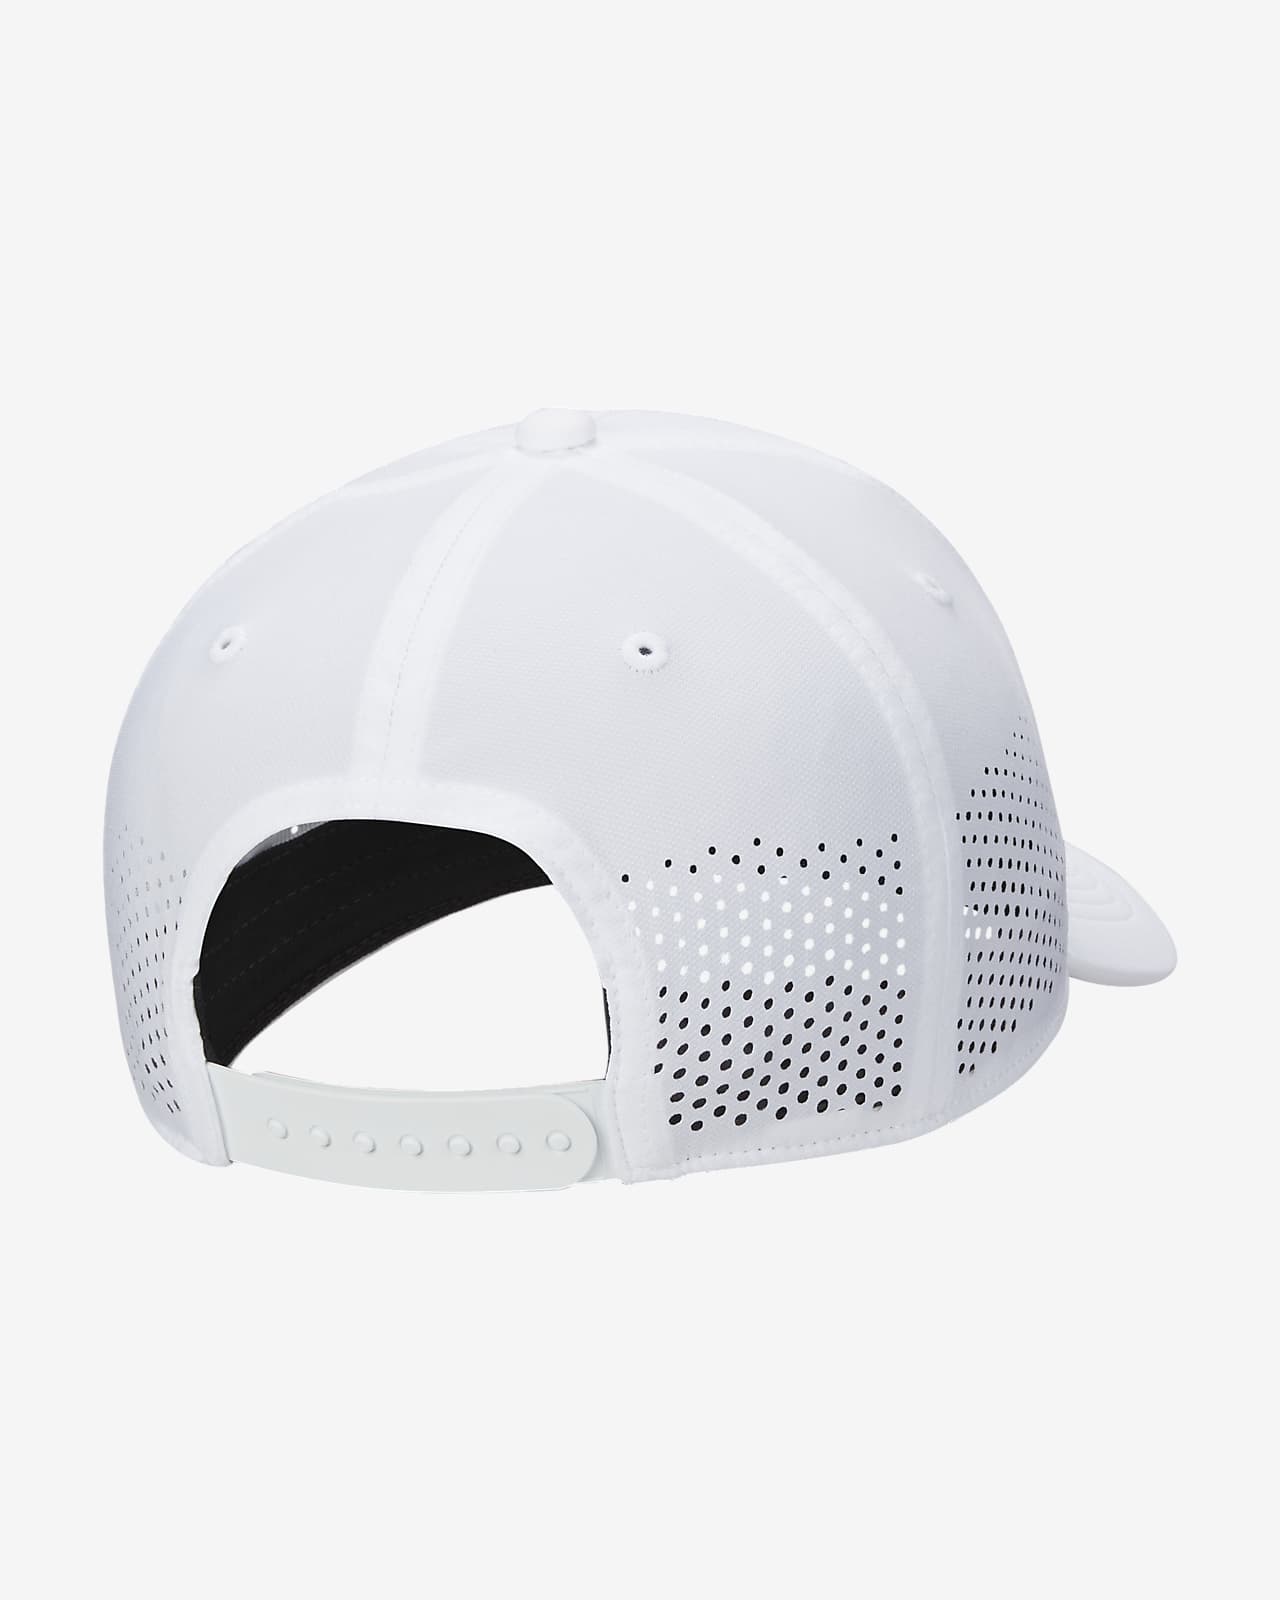 Nike Dri-FIT Club Structured Blank Front Cap